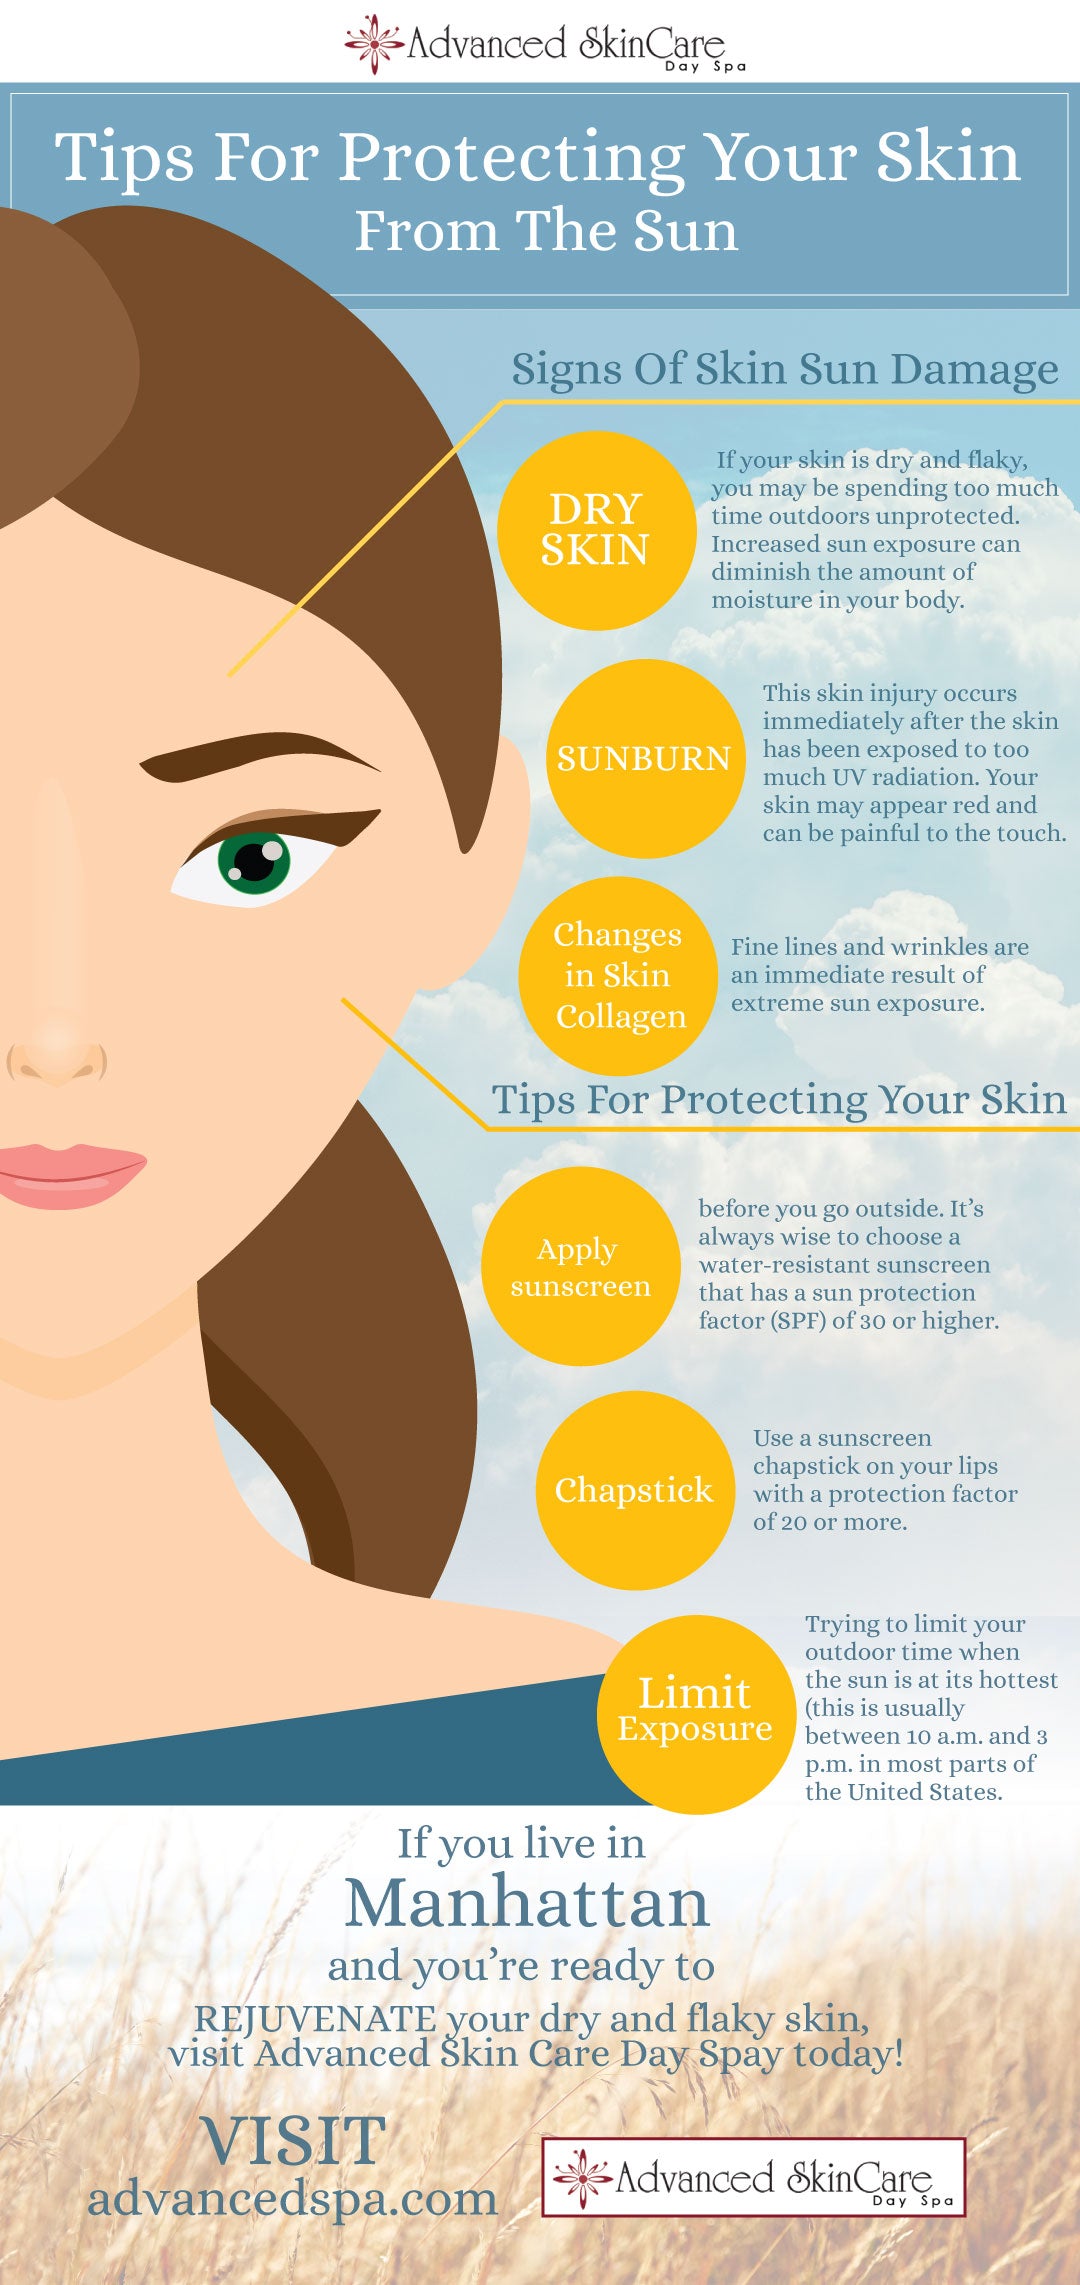 Tips for Protecting Your Skin This Summer